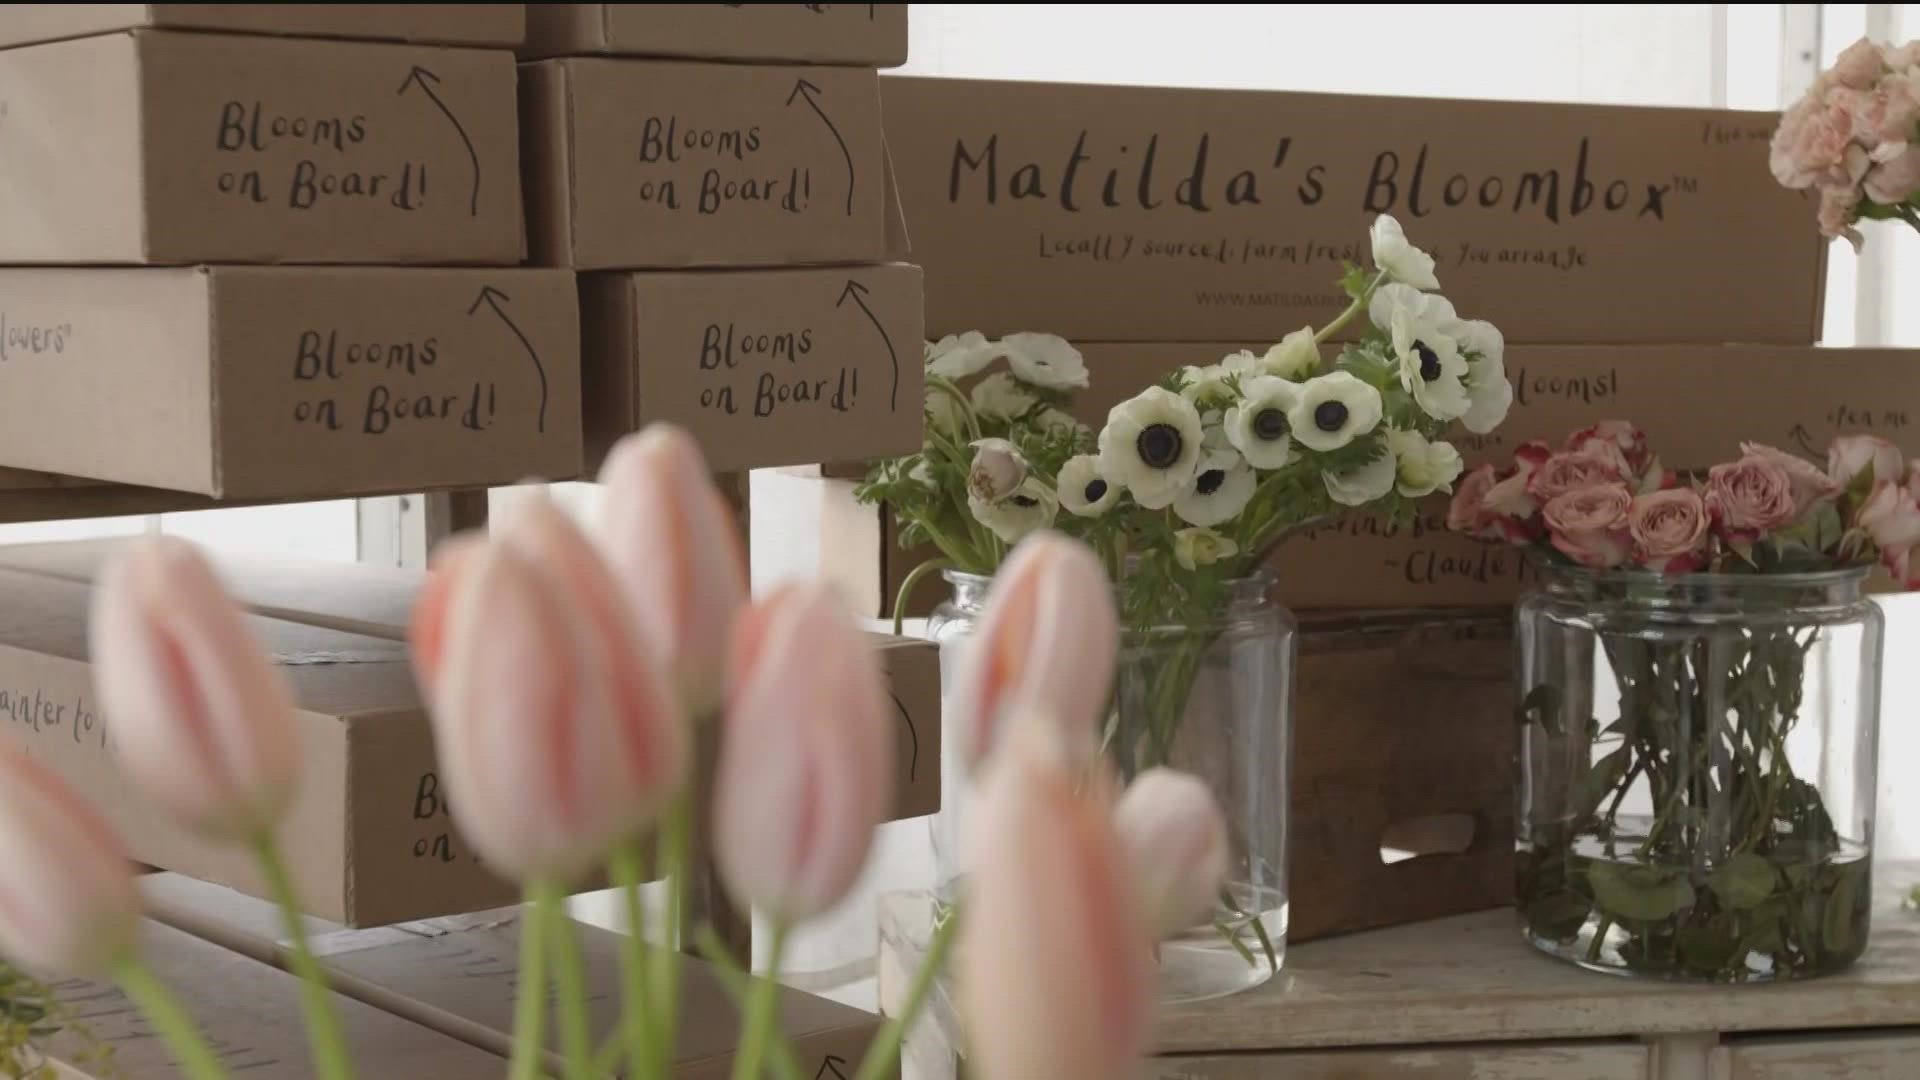 Matilda's Bloombox delivers a box stuffed with locally grown flowers for $39.